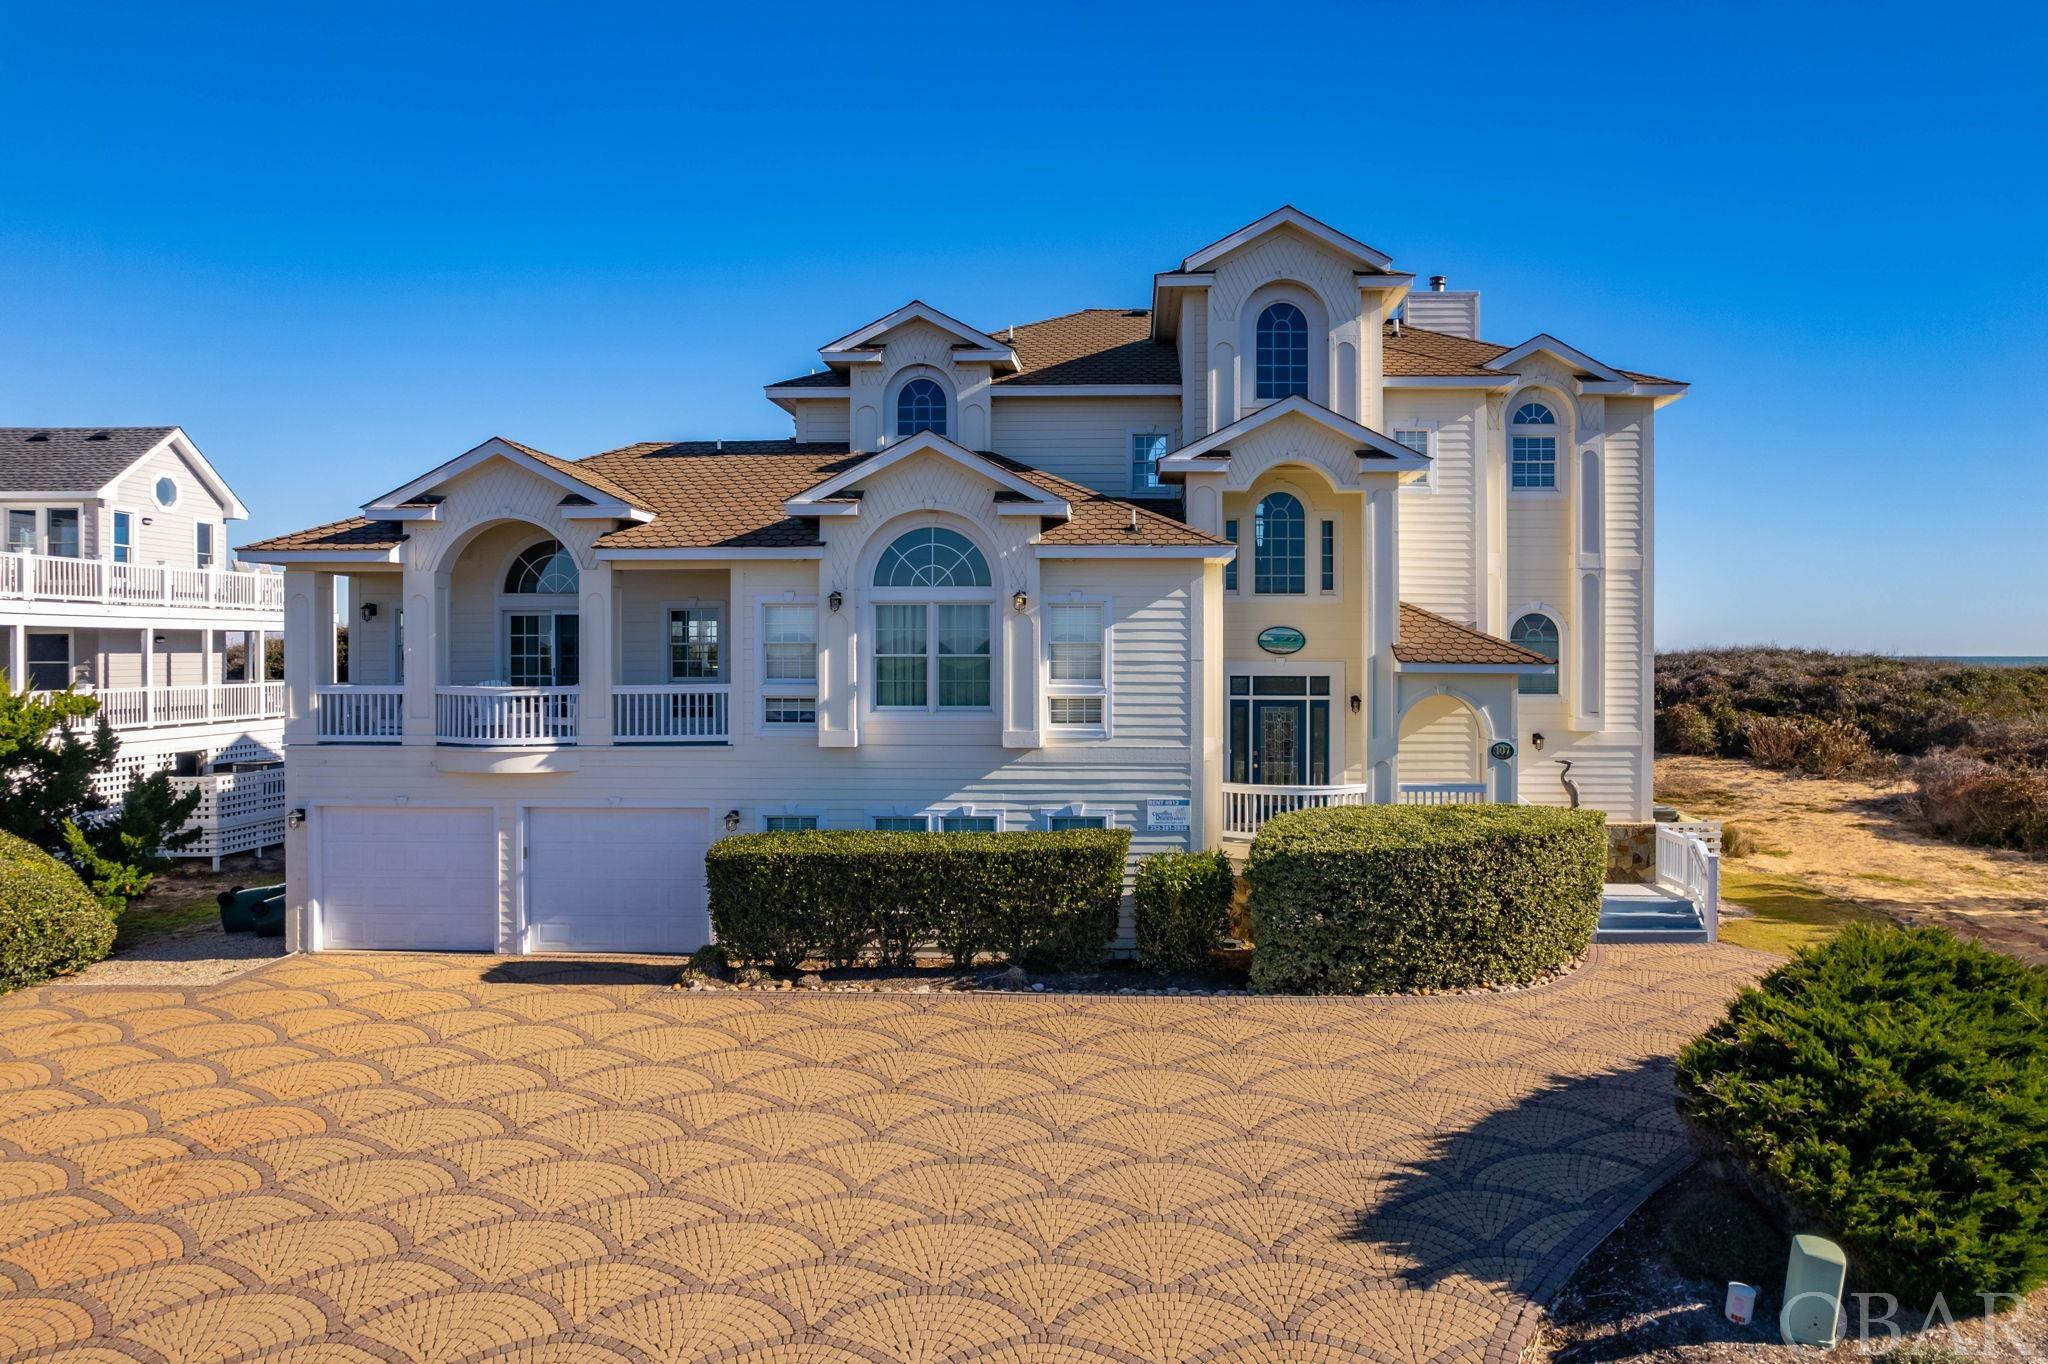 Remarkable oceanfront estate in Pine Island with unobstructed ocean to sound views and vast amenities inside and out. Proven rental history with $379,380 advertised income on the books for 2023.